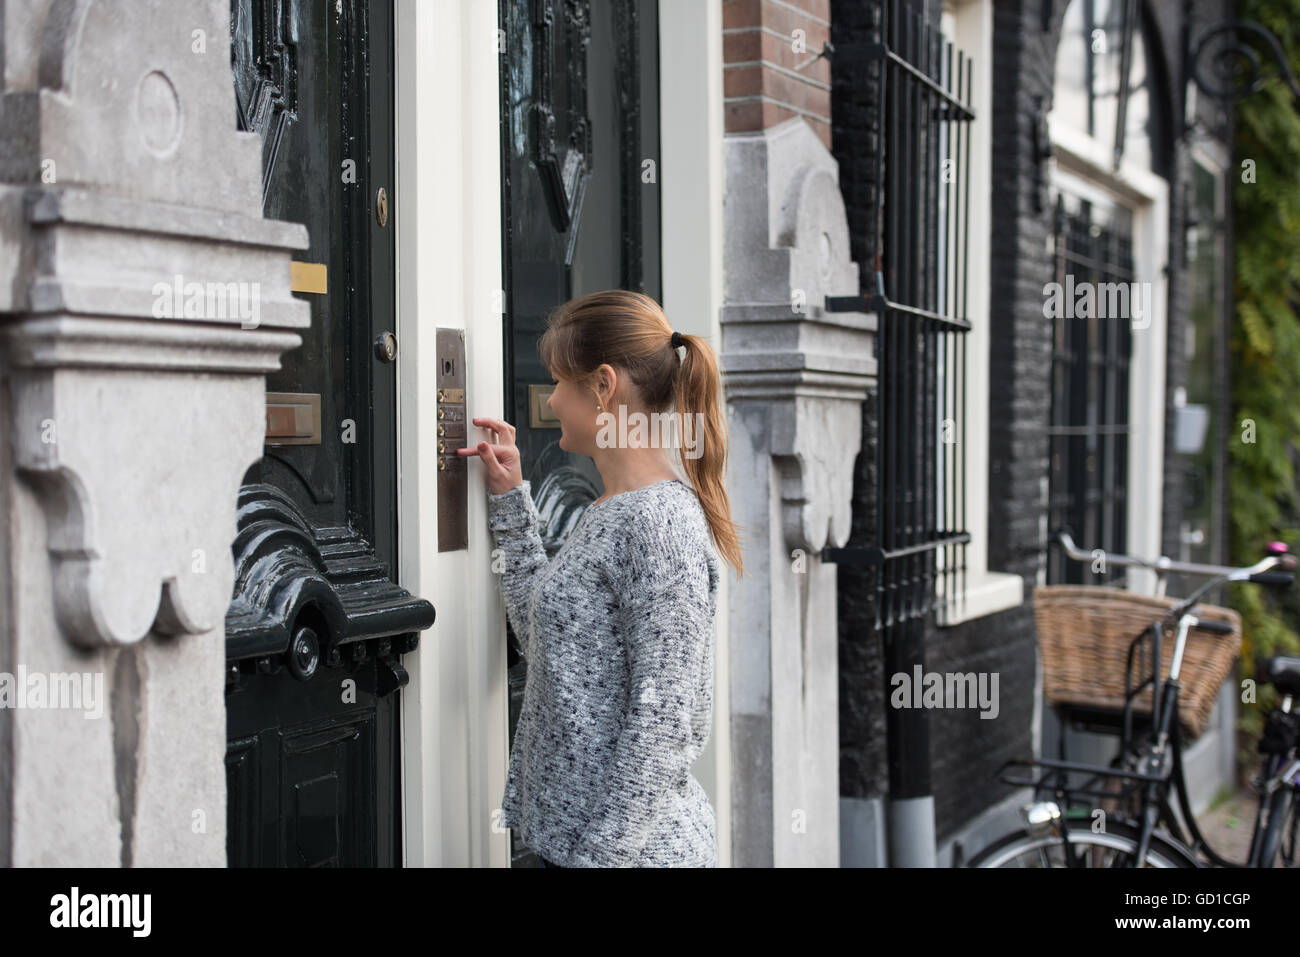 young woman in front of entrance door, ringing at the door bell Stock Photo